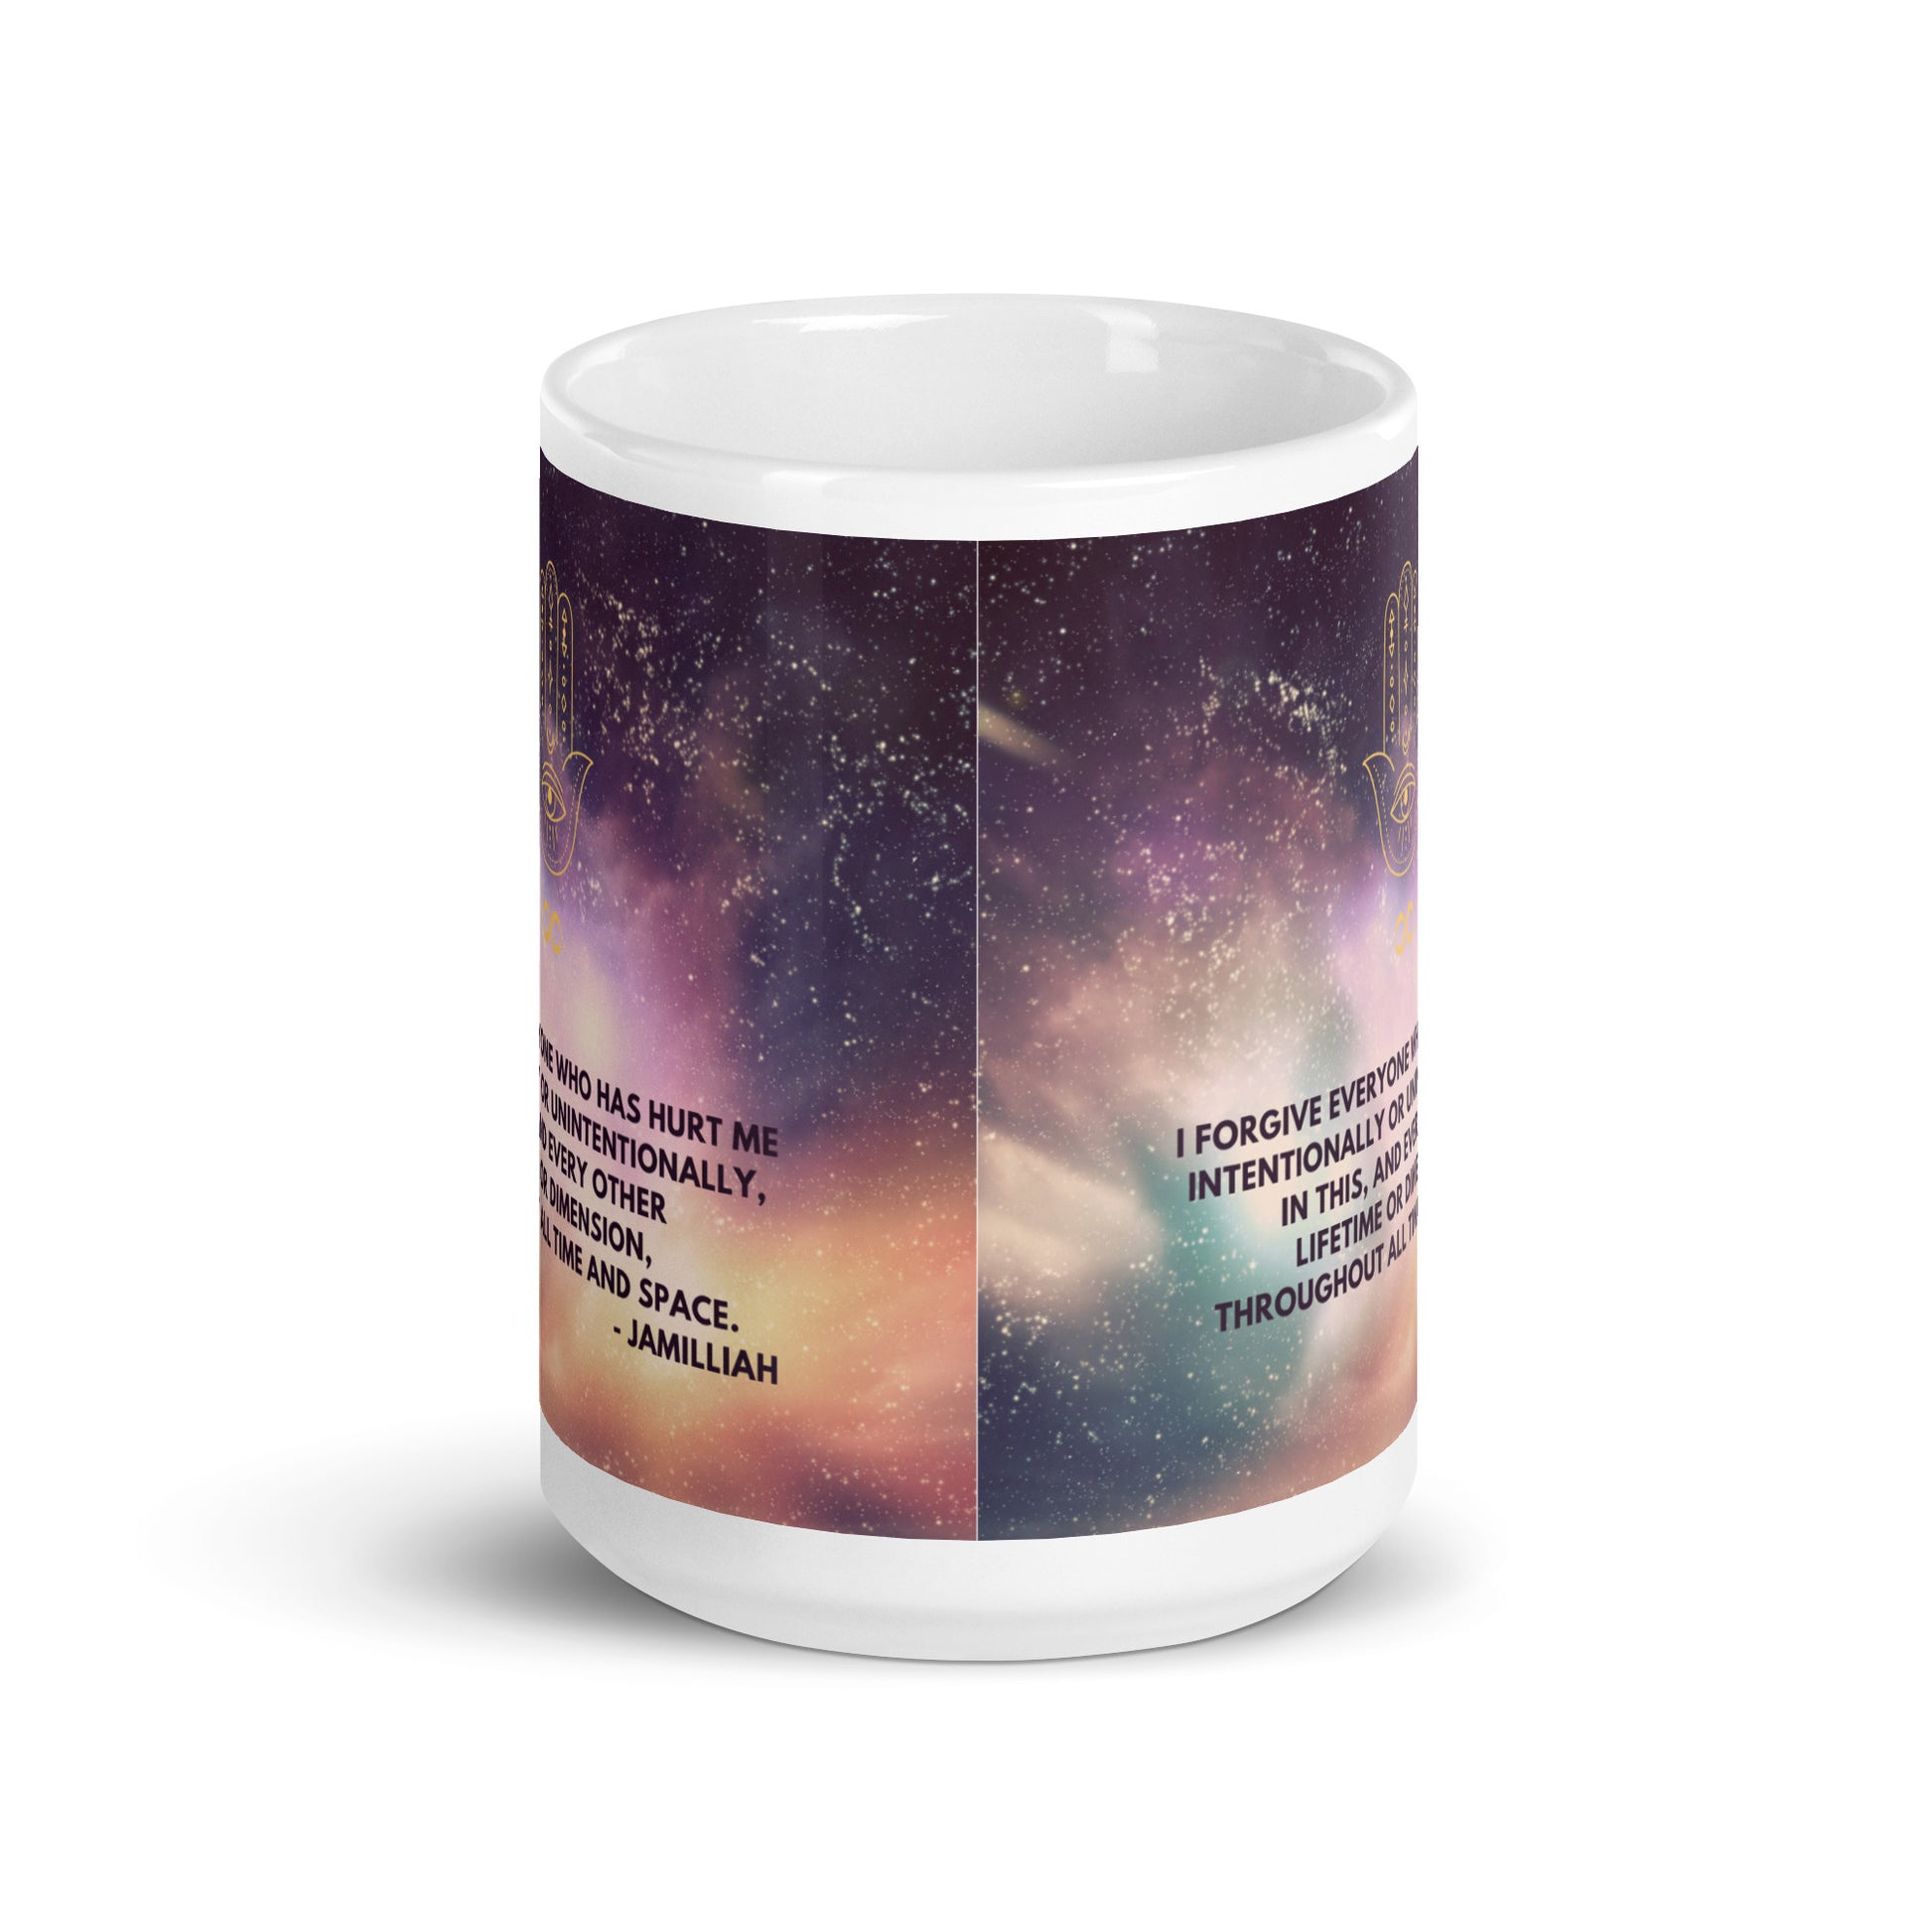 White and purple, glossy, 15oz coffee/tea mug with original logo and quote, front view. Spiritual hamsa hand/infinity sign brand logo. Cosmos/universe/galaxy/space design. Original forgiveness and inner healing, wise quote mantra/motto/saying/tagline/slogan. "I Forgive Everyone Who Has Hurt Me Intentionally Or Unintentionally, In This, And Every Other Lifetime Or Dimension, Throughout All Time And Space." - Jamilliah - JAMILLIAH'S WISDOM IS TIMELESS SHOP - wisdomistimeless.com.